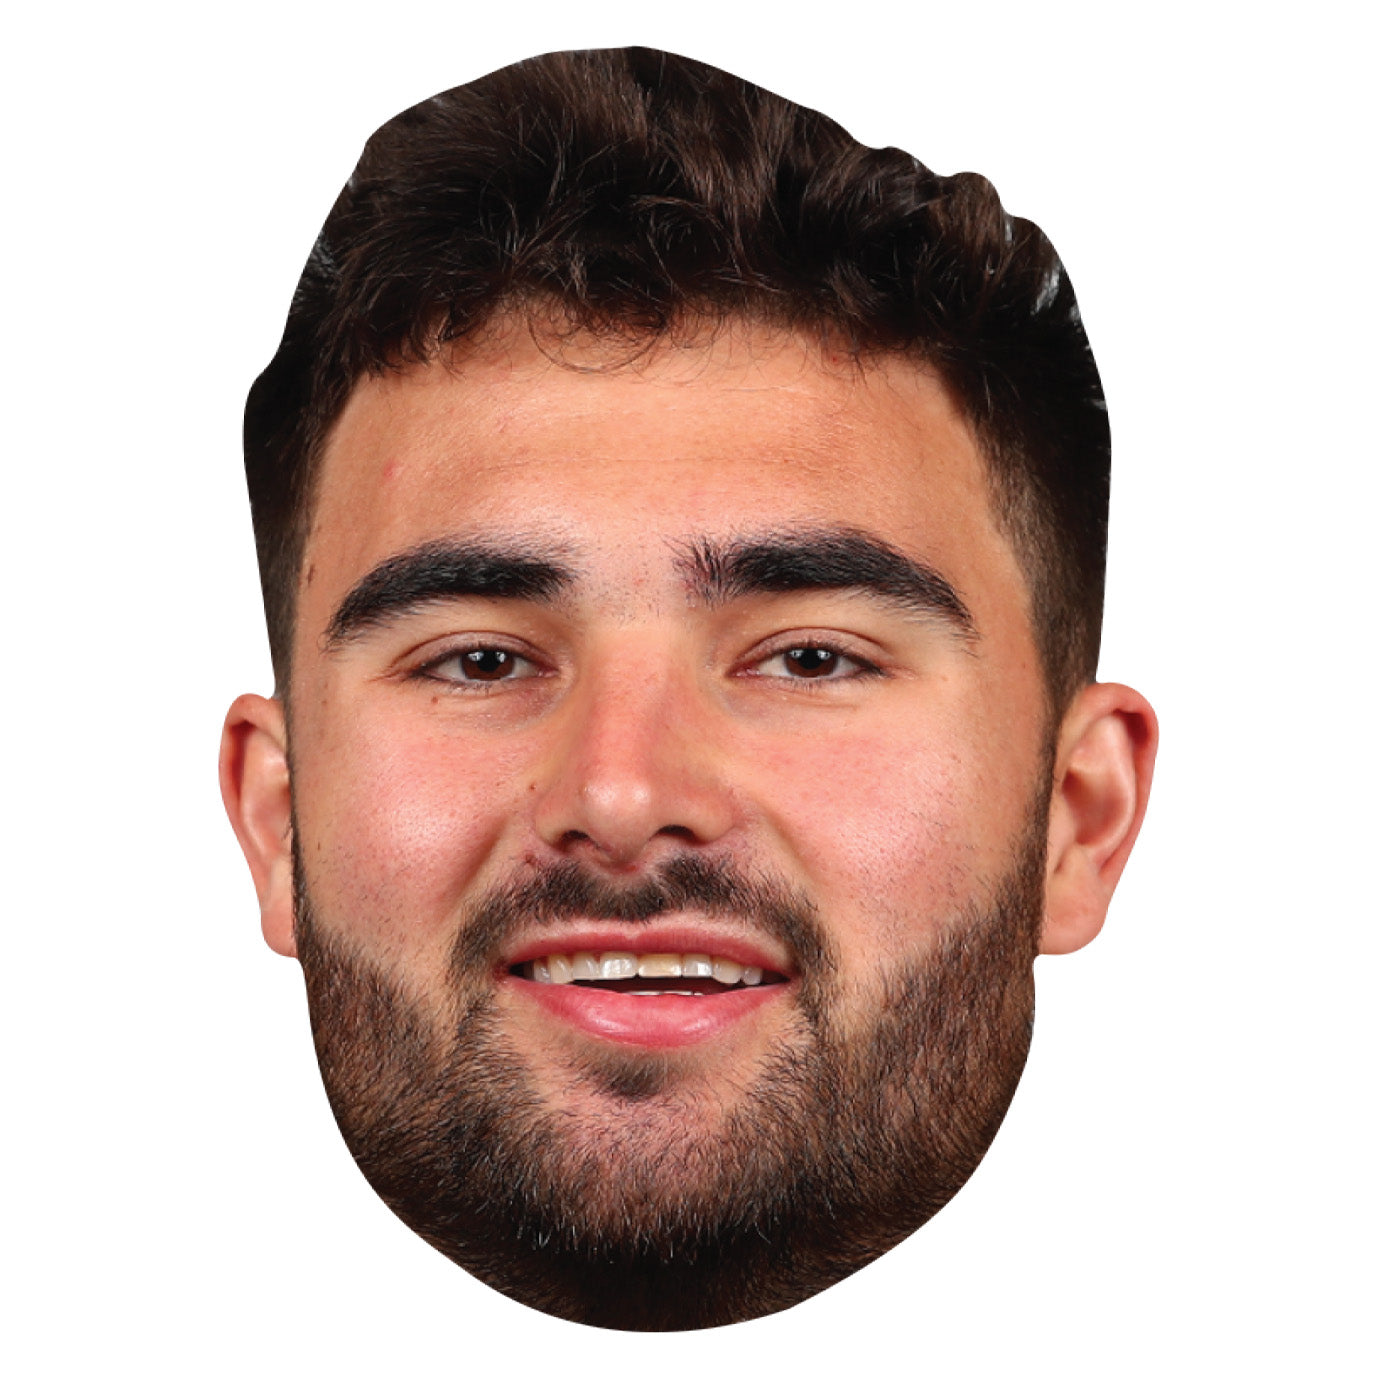 Seattle Seahawks: Sam Howell Foam Core Cutout - Officially Licensed NFLPA Big Head